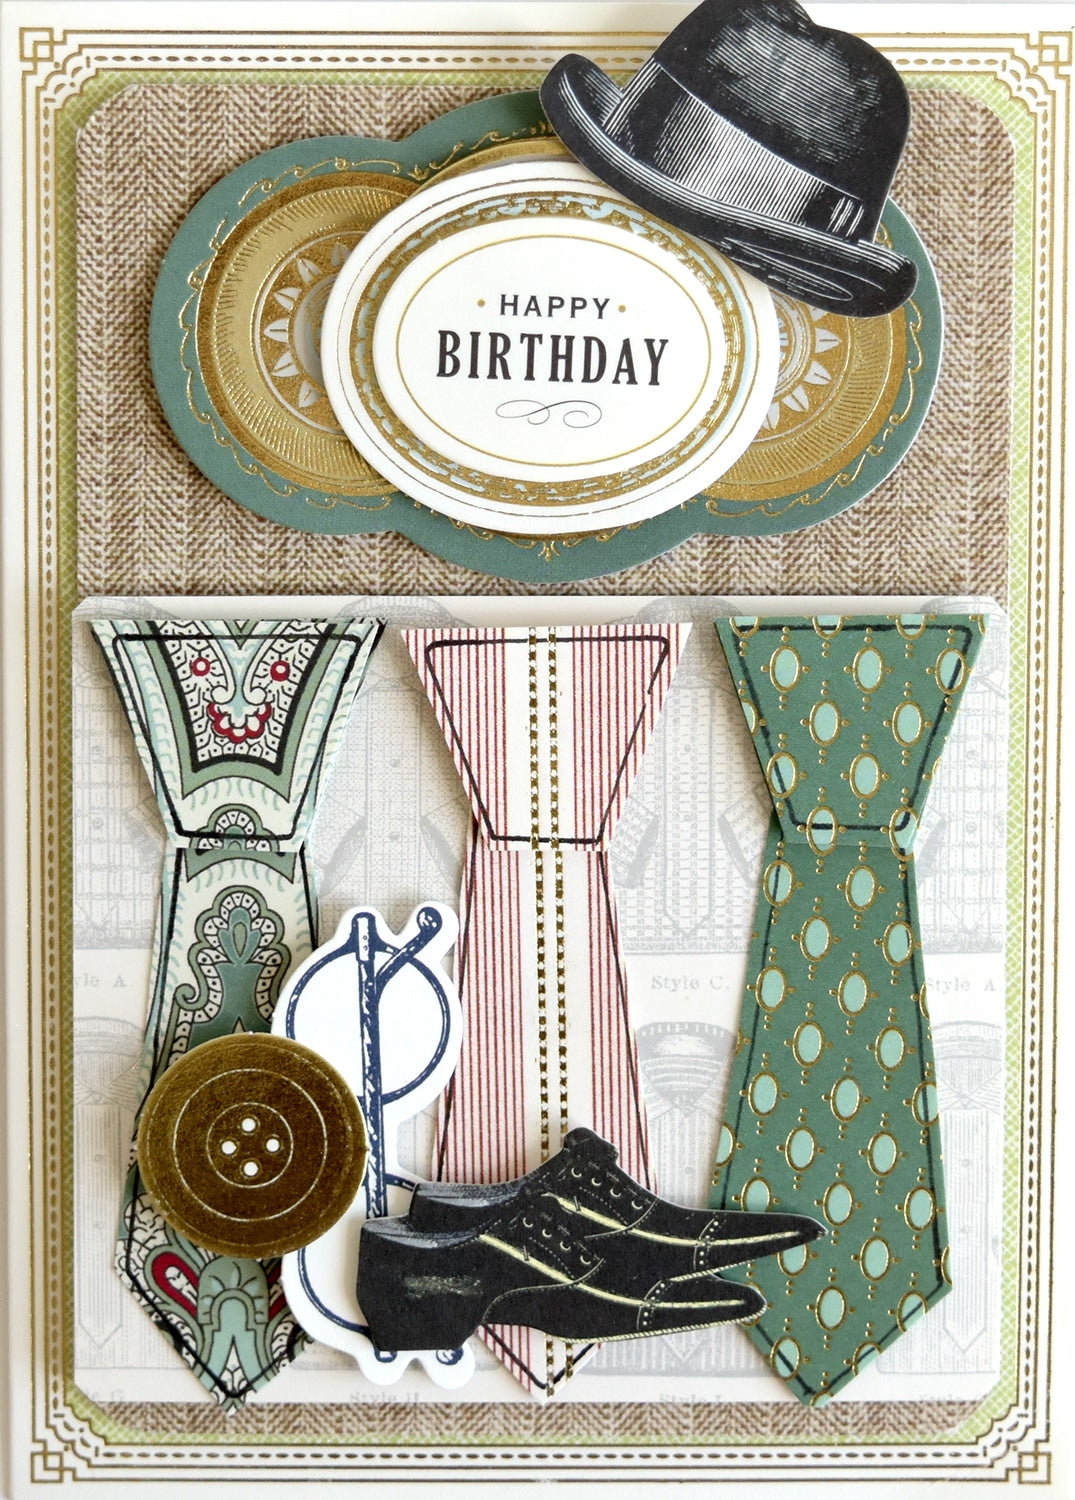 a birthday card with ties and a hat.